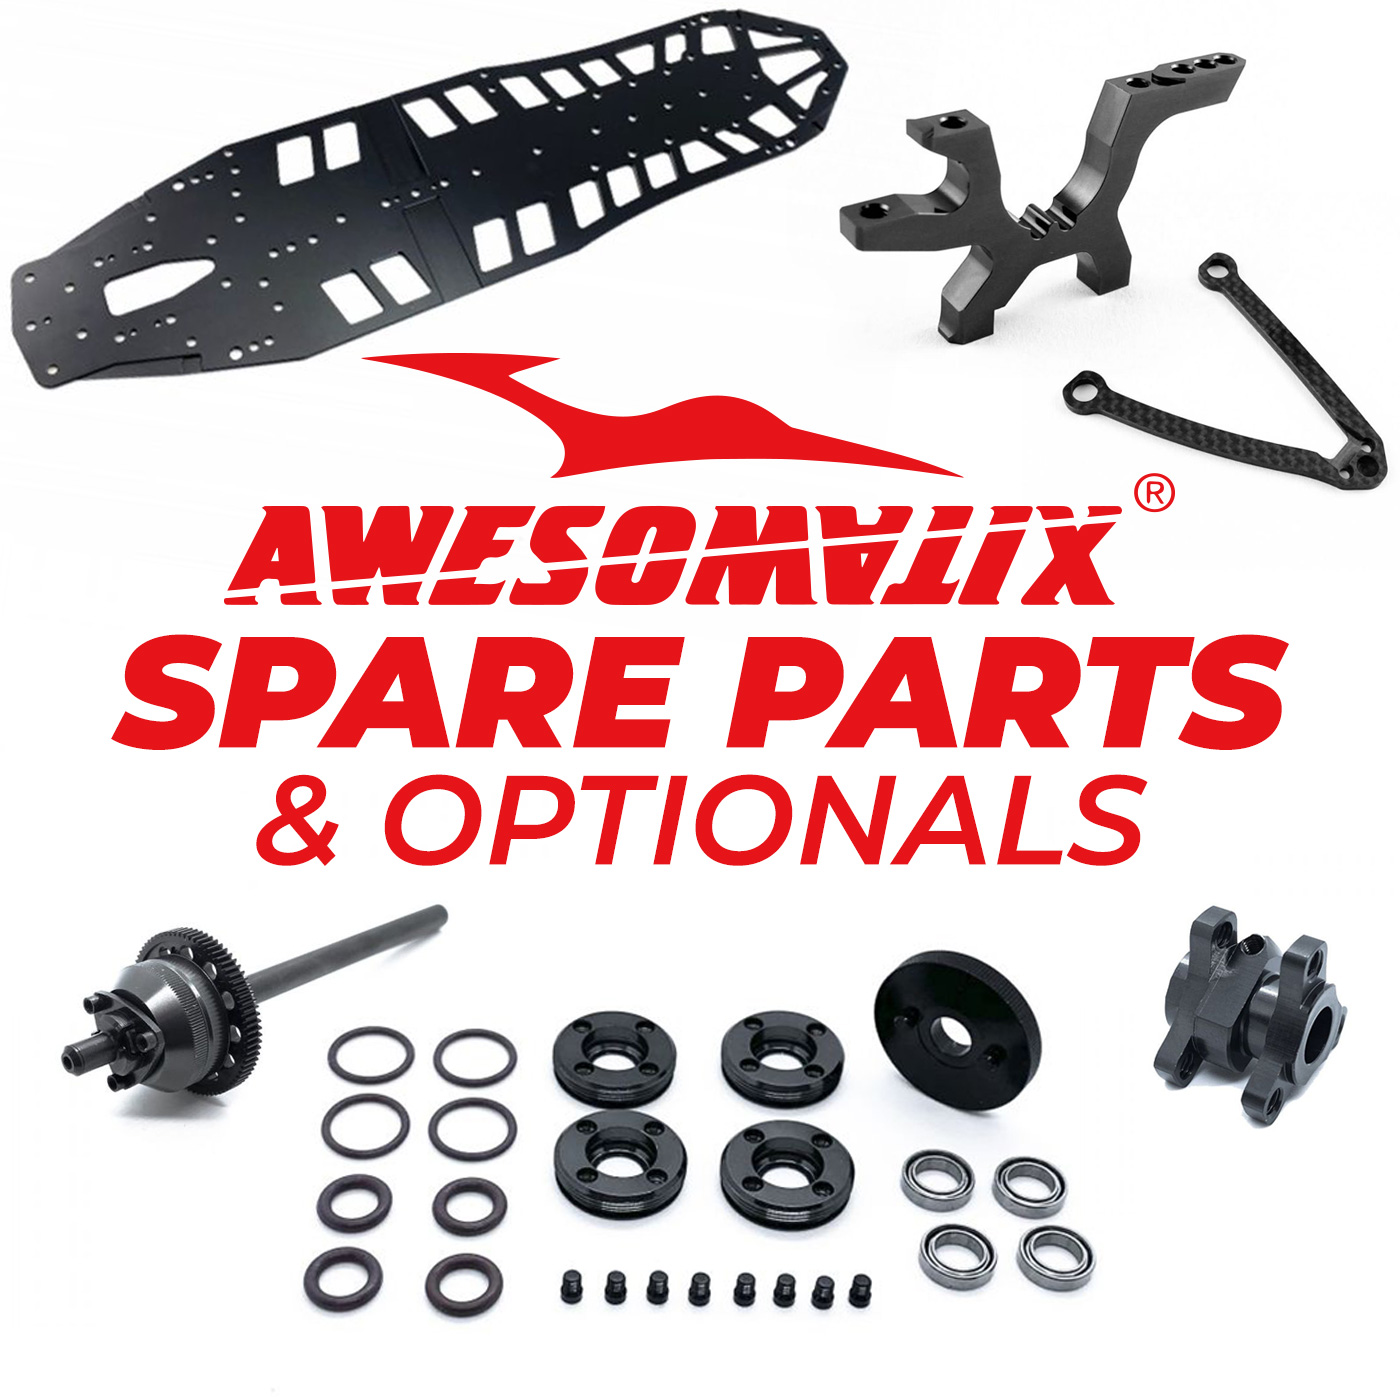 awesomatix a800r spare parts